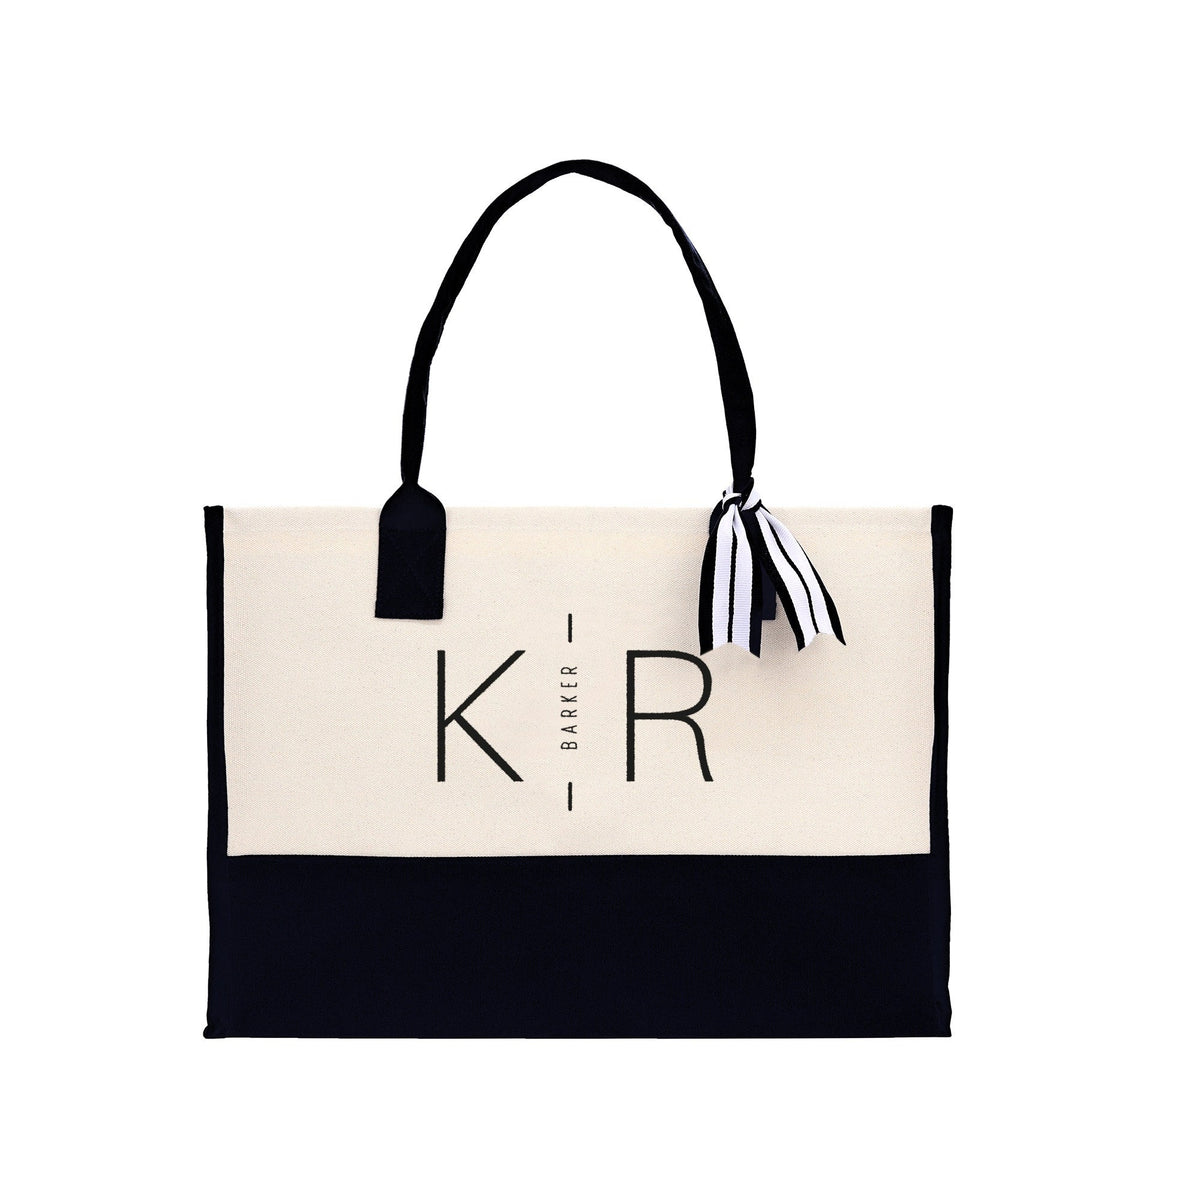 Initials and Last Name Customized Embroidered Tote Bag 100% Cotton